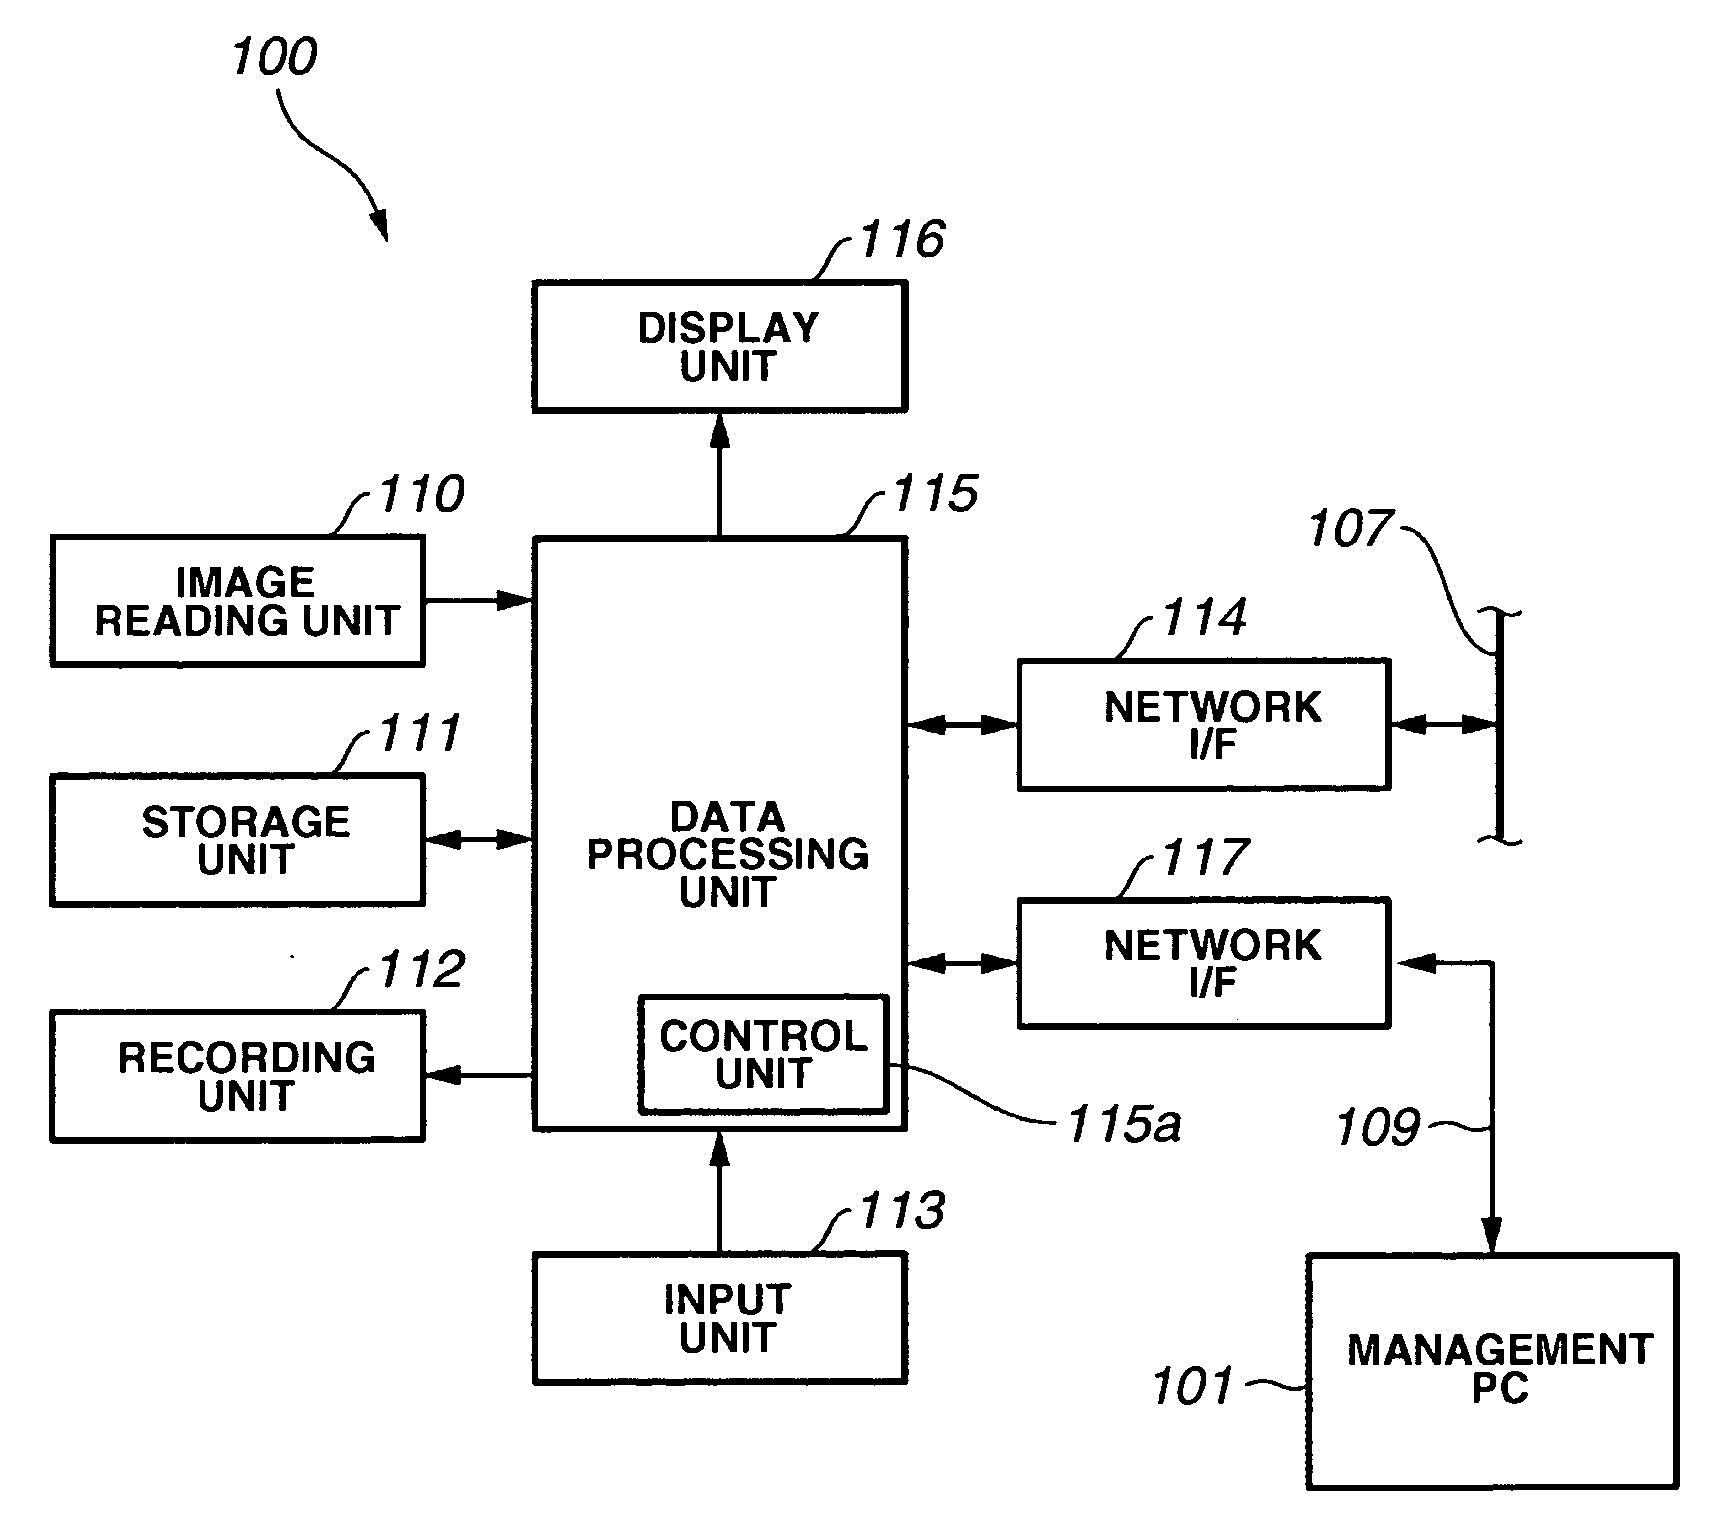 Image processing apparatus and a method therefor